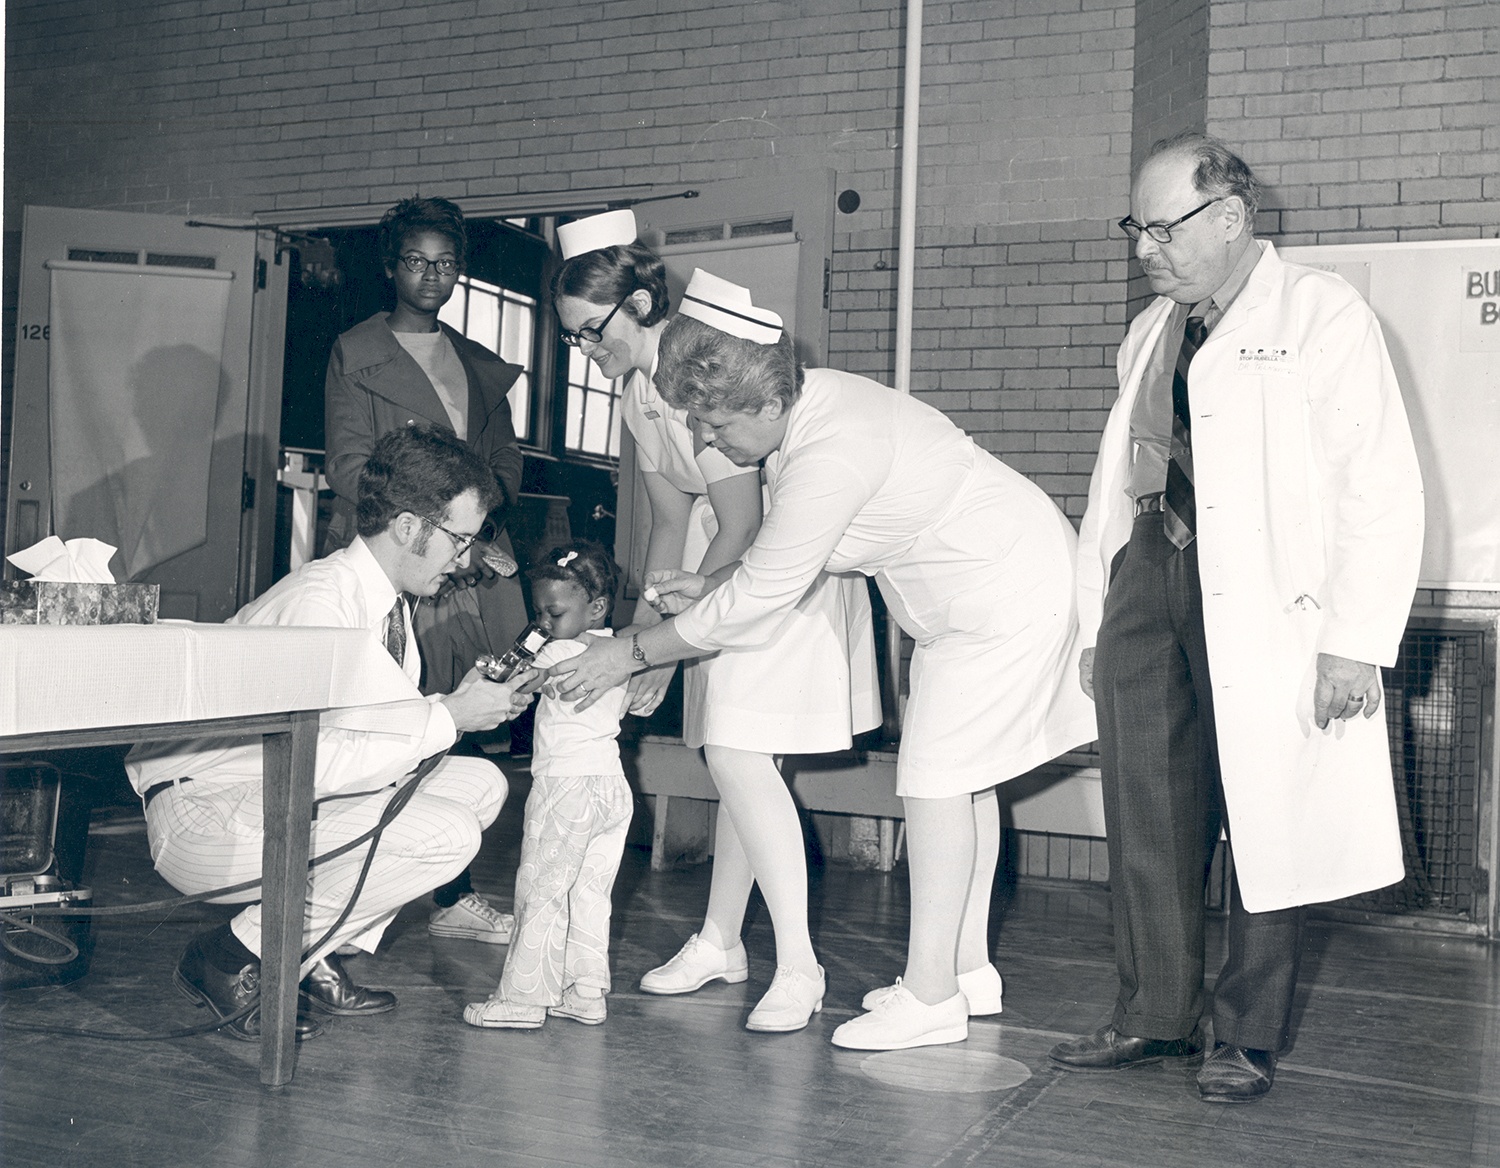 A child at Gladstone School receives a vaccination during Allegheny County’s Rubella Campaign, Vinard Studios, c. 1970.